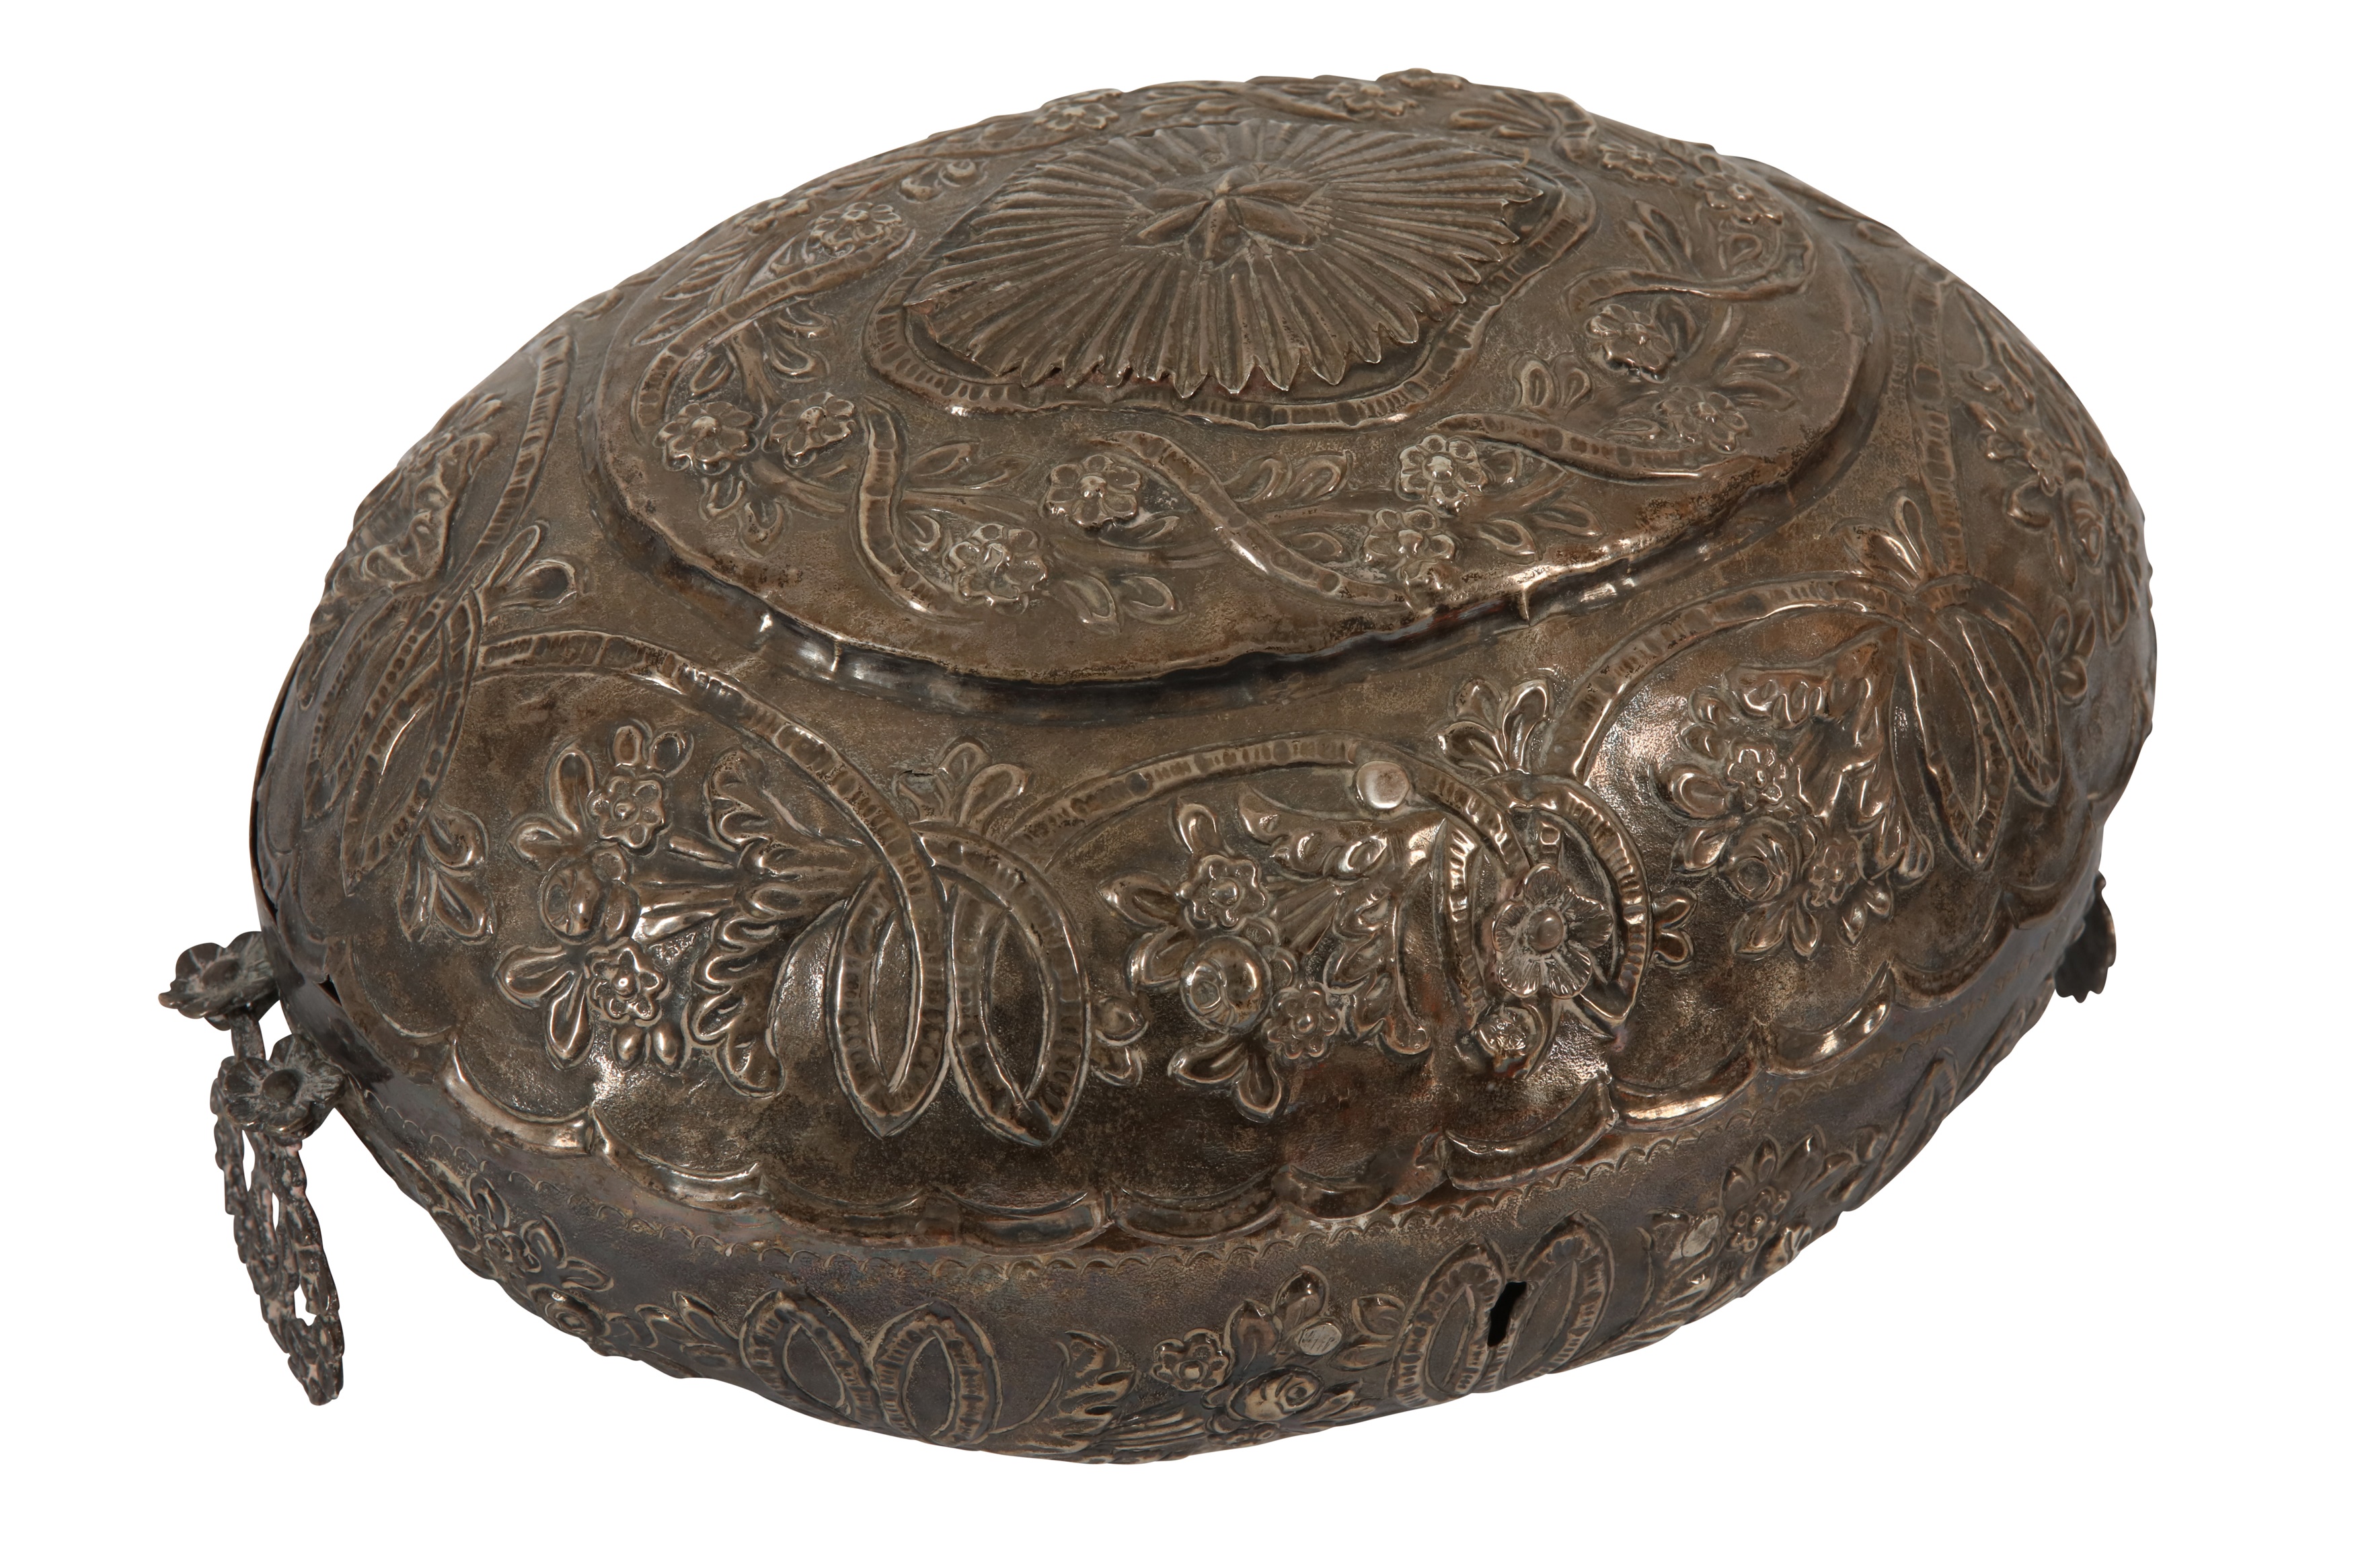 AN OTTOMAN SILVER OVAL CASKET OR SPICE BOX, LATE 19TH/EARLY 20TH CENTURY - Image 3 of 3